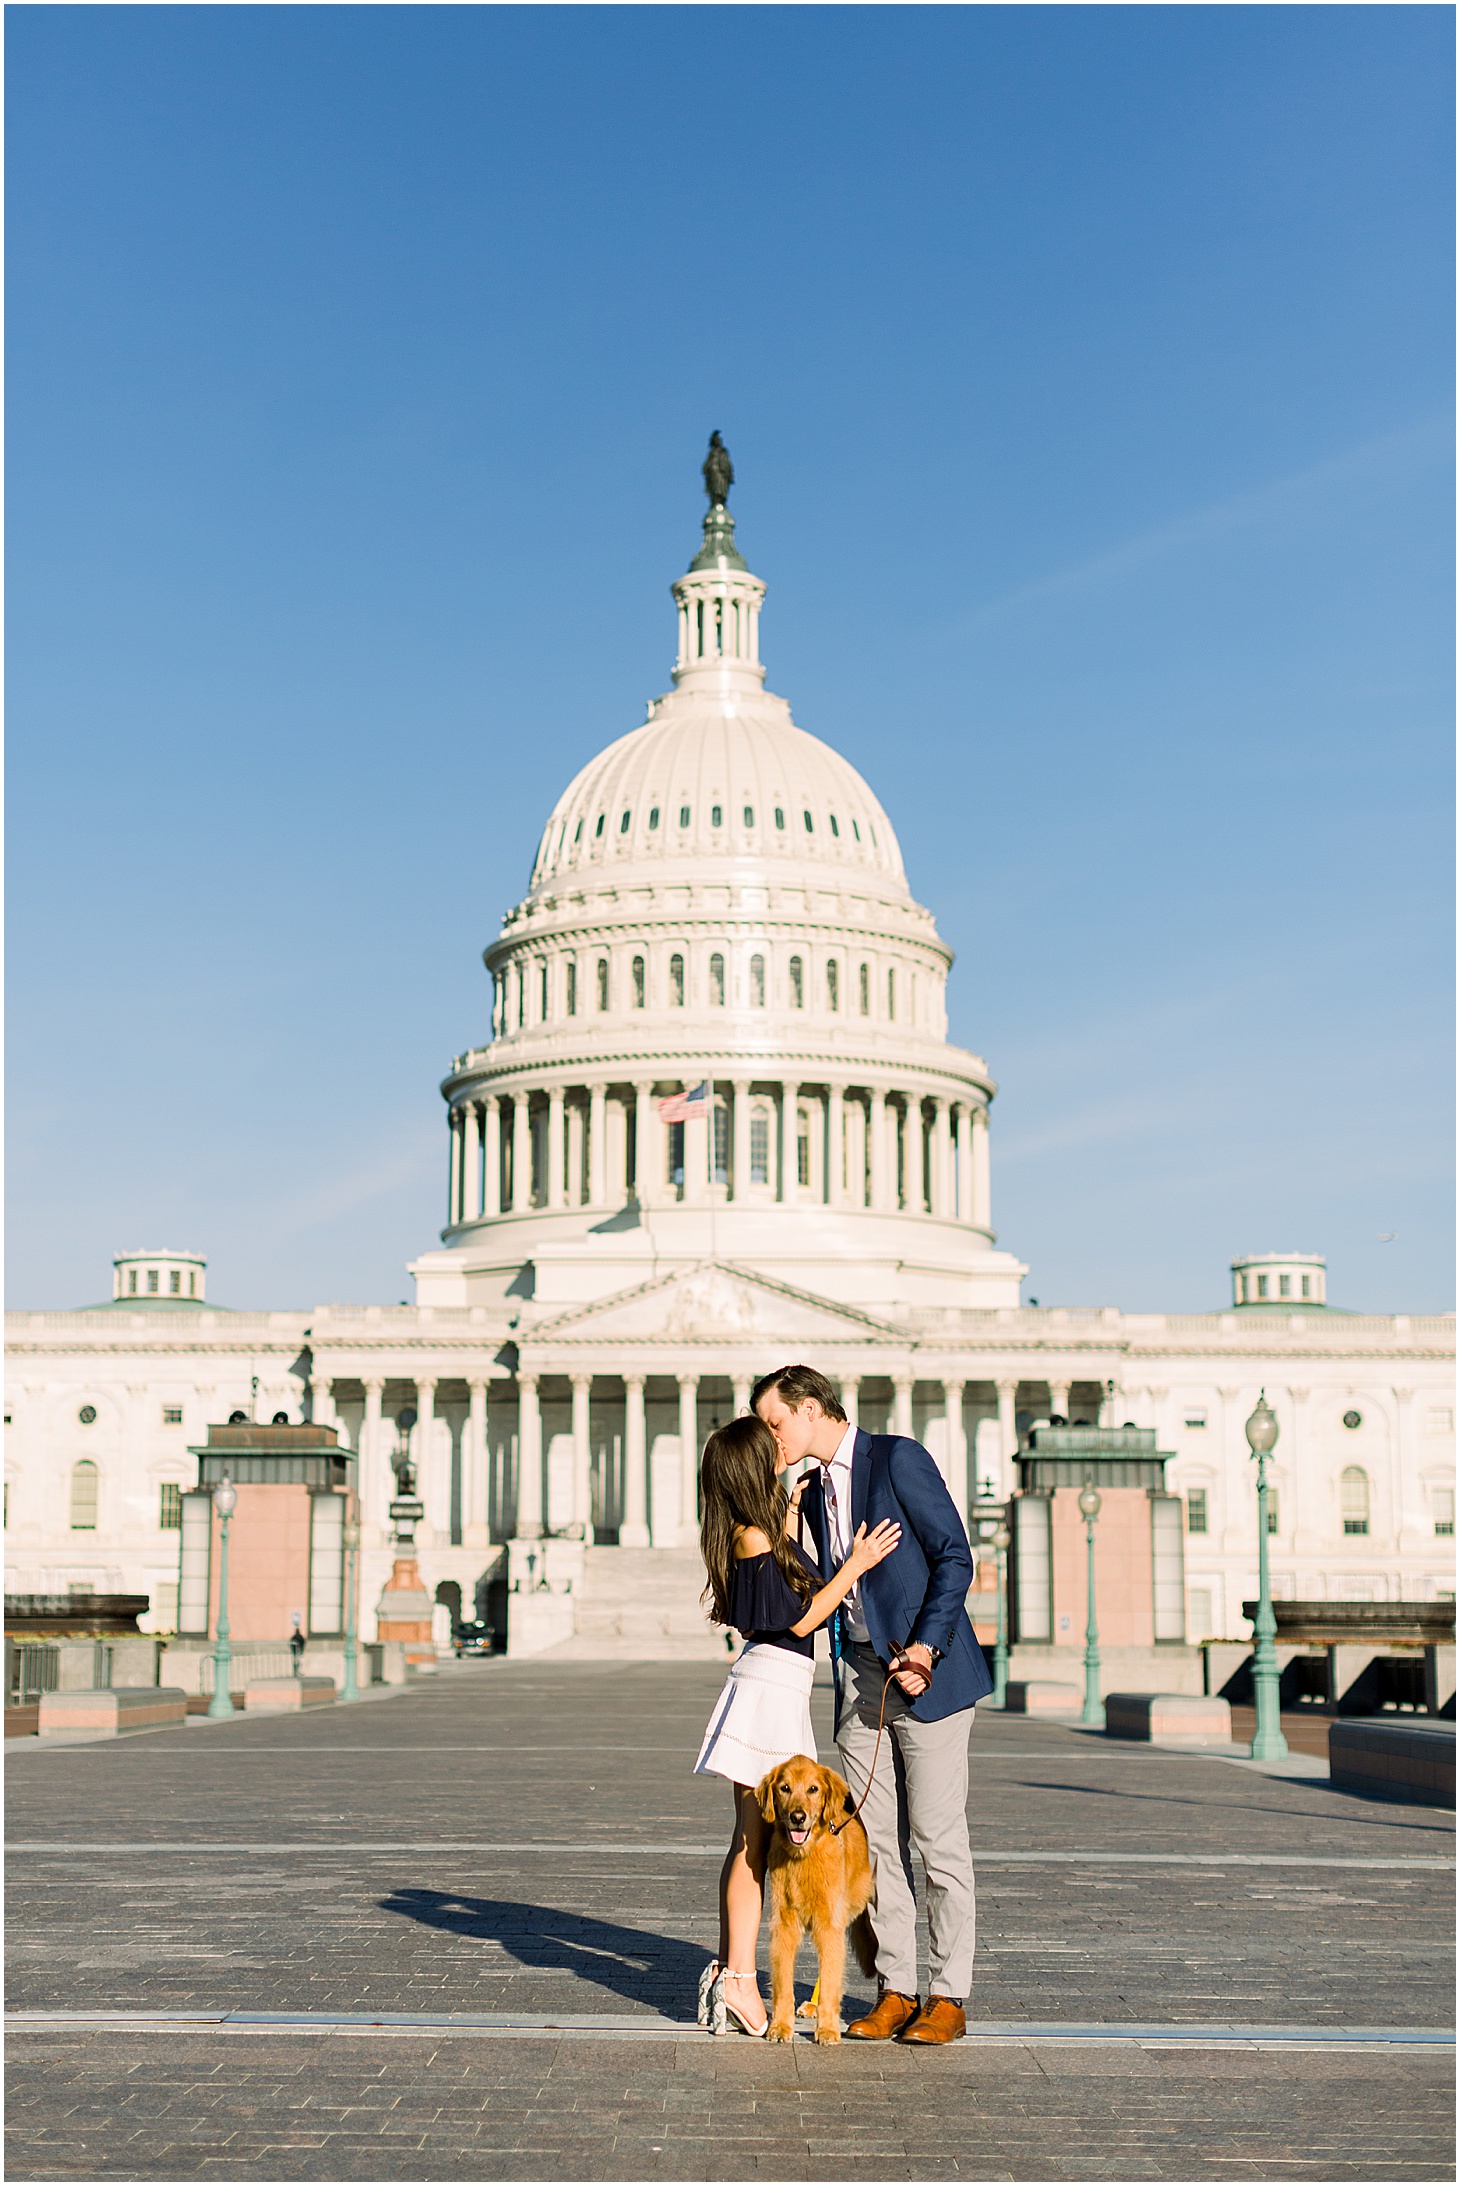 Sarah Bradshaw Photography, Preppy Morning Engagement Portraits with Golden Light and Golden Retriever